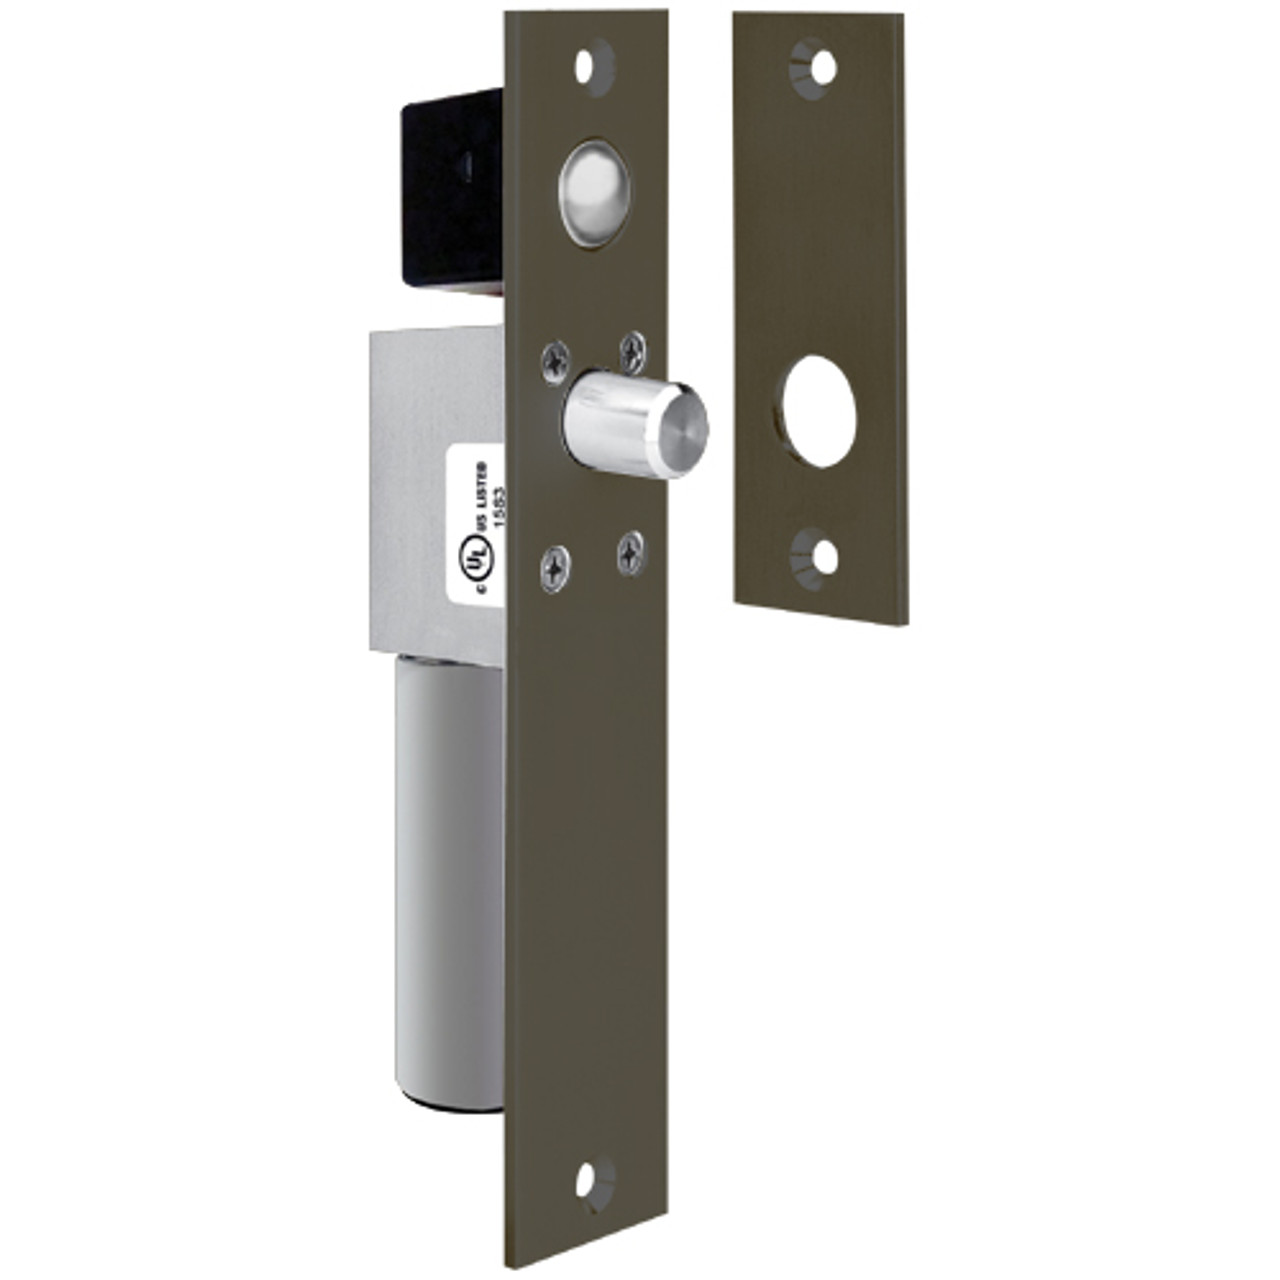 1291AHH SDC Failsecure Spacesaver Mortise Bolt Lock in Oil Rubbed Bronze